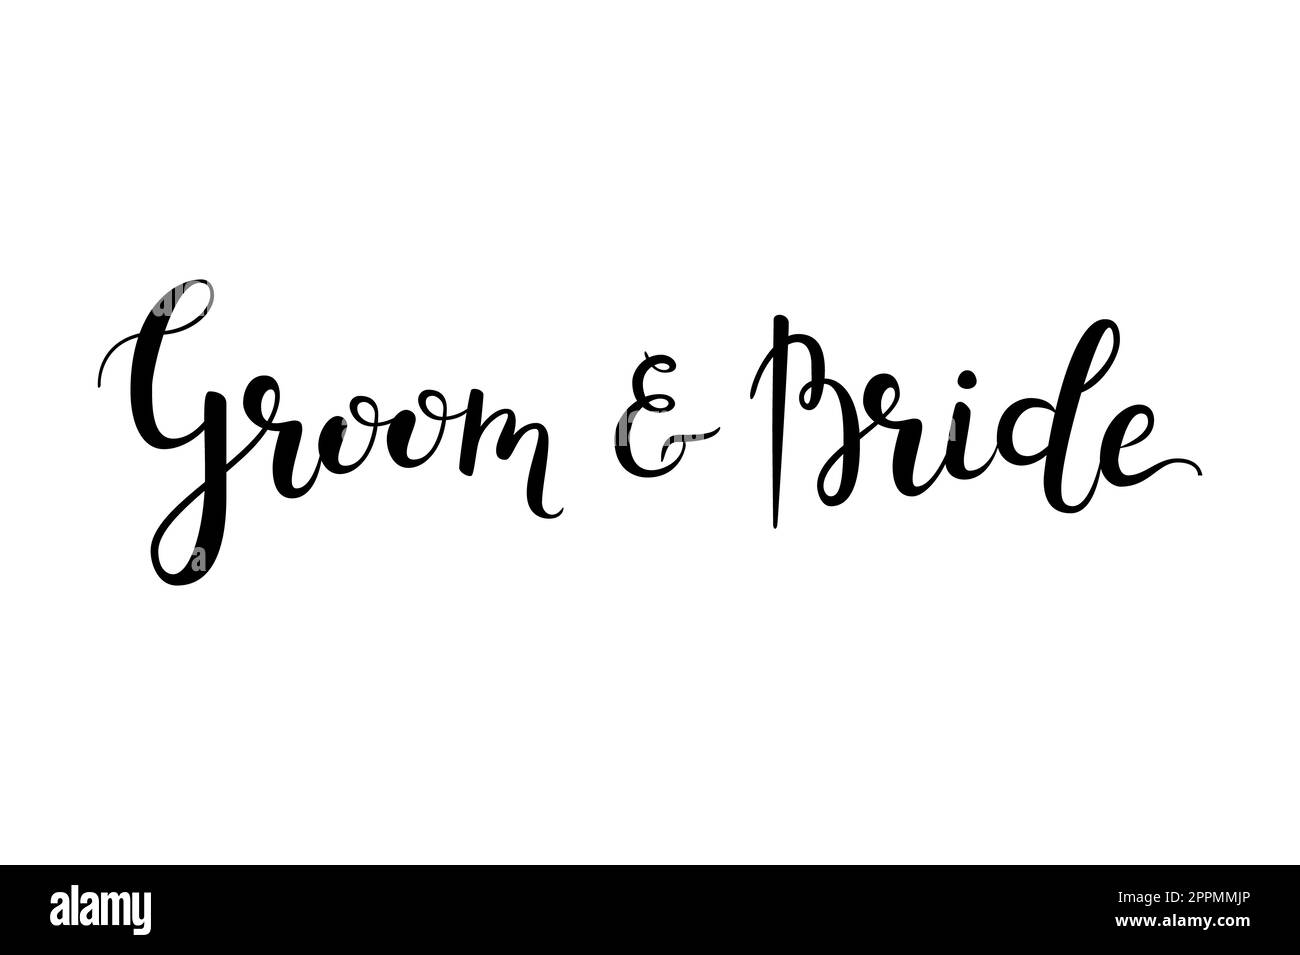 Groom and bride hand-drawn lettering decoration text on white background. Wedding design template for greeting cards, invitations, banners, gifts, prints and posters. Calligraphic inscription. Stock Photo